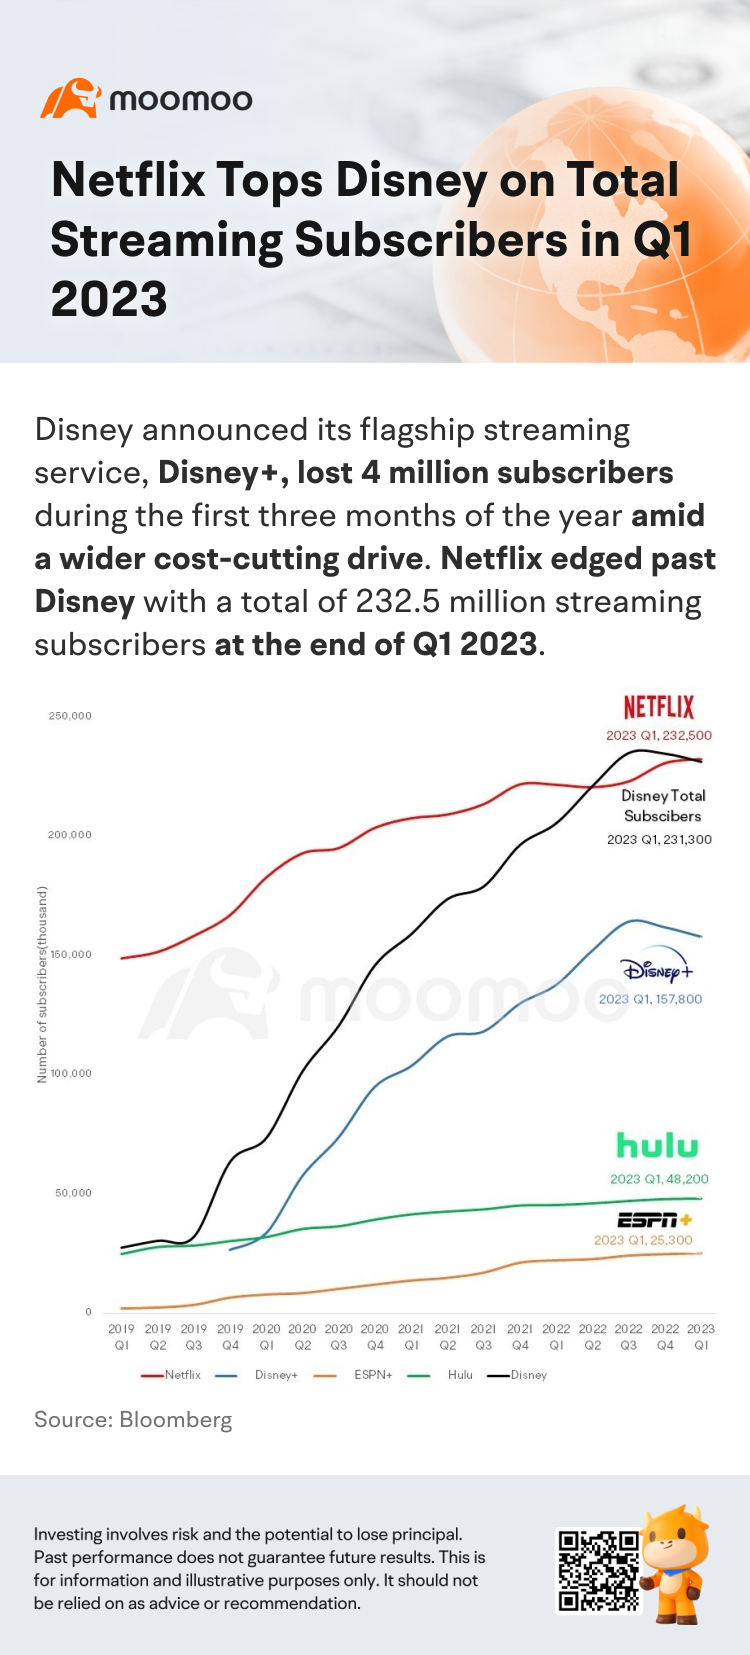 Netflix Tops Disney on Total Streaming Subscribers in Q1 2023